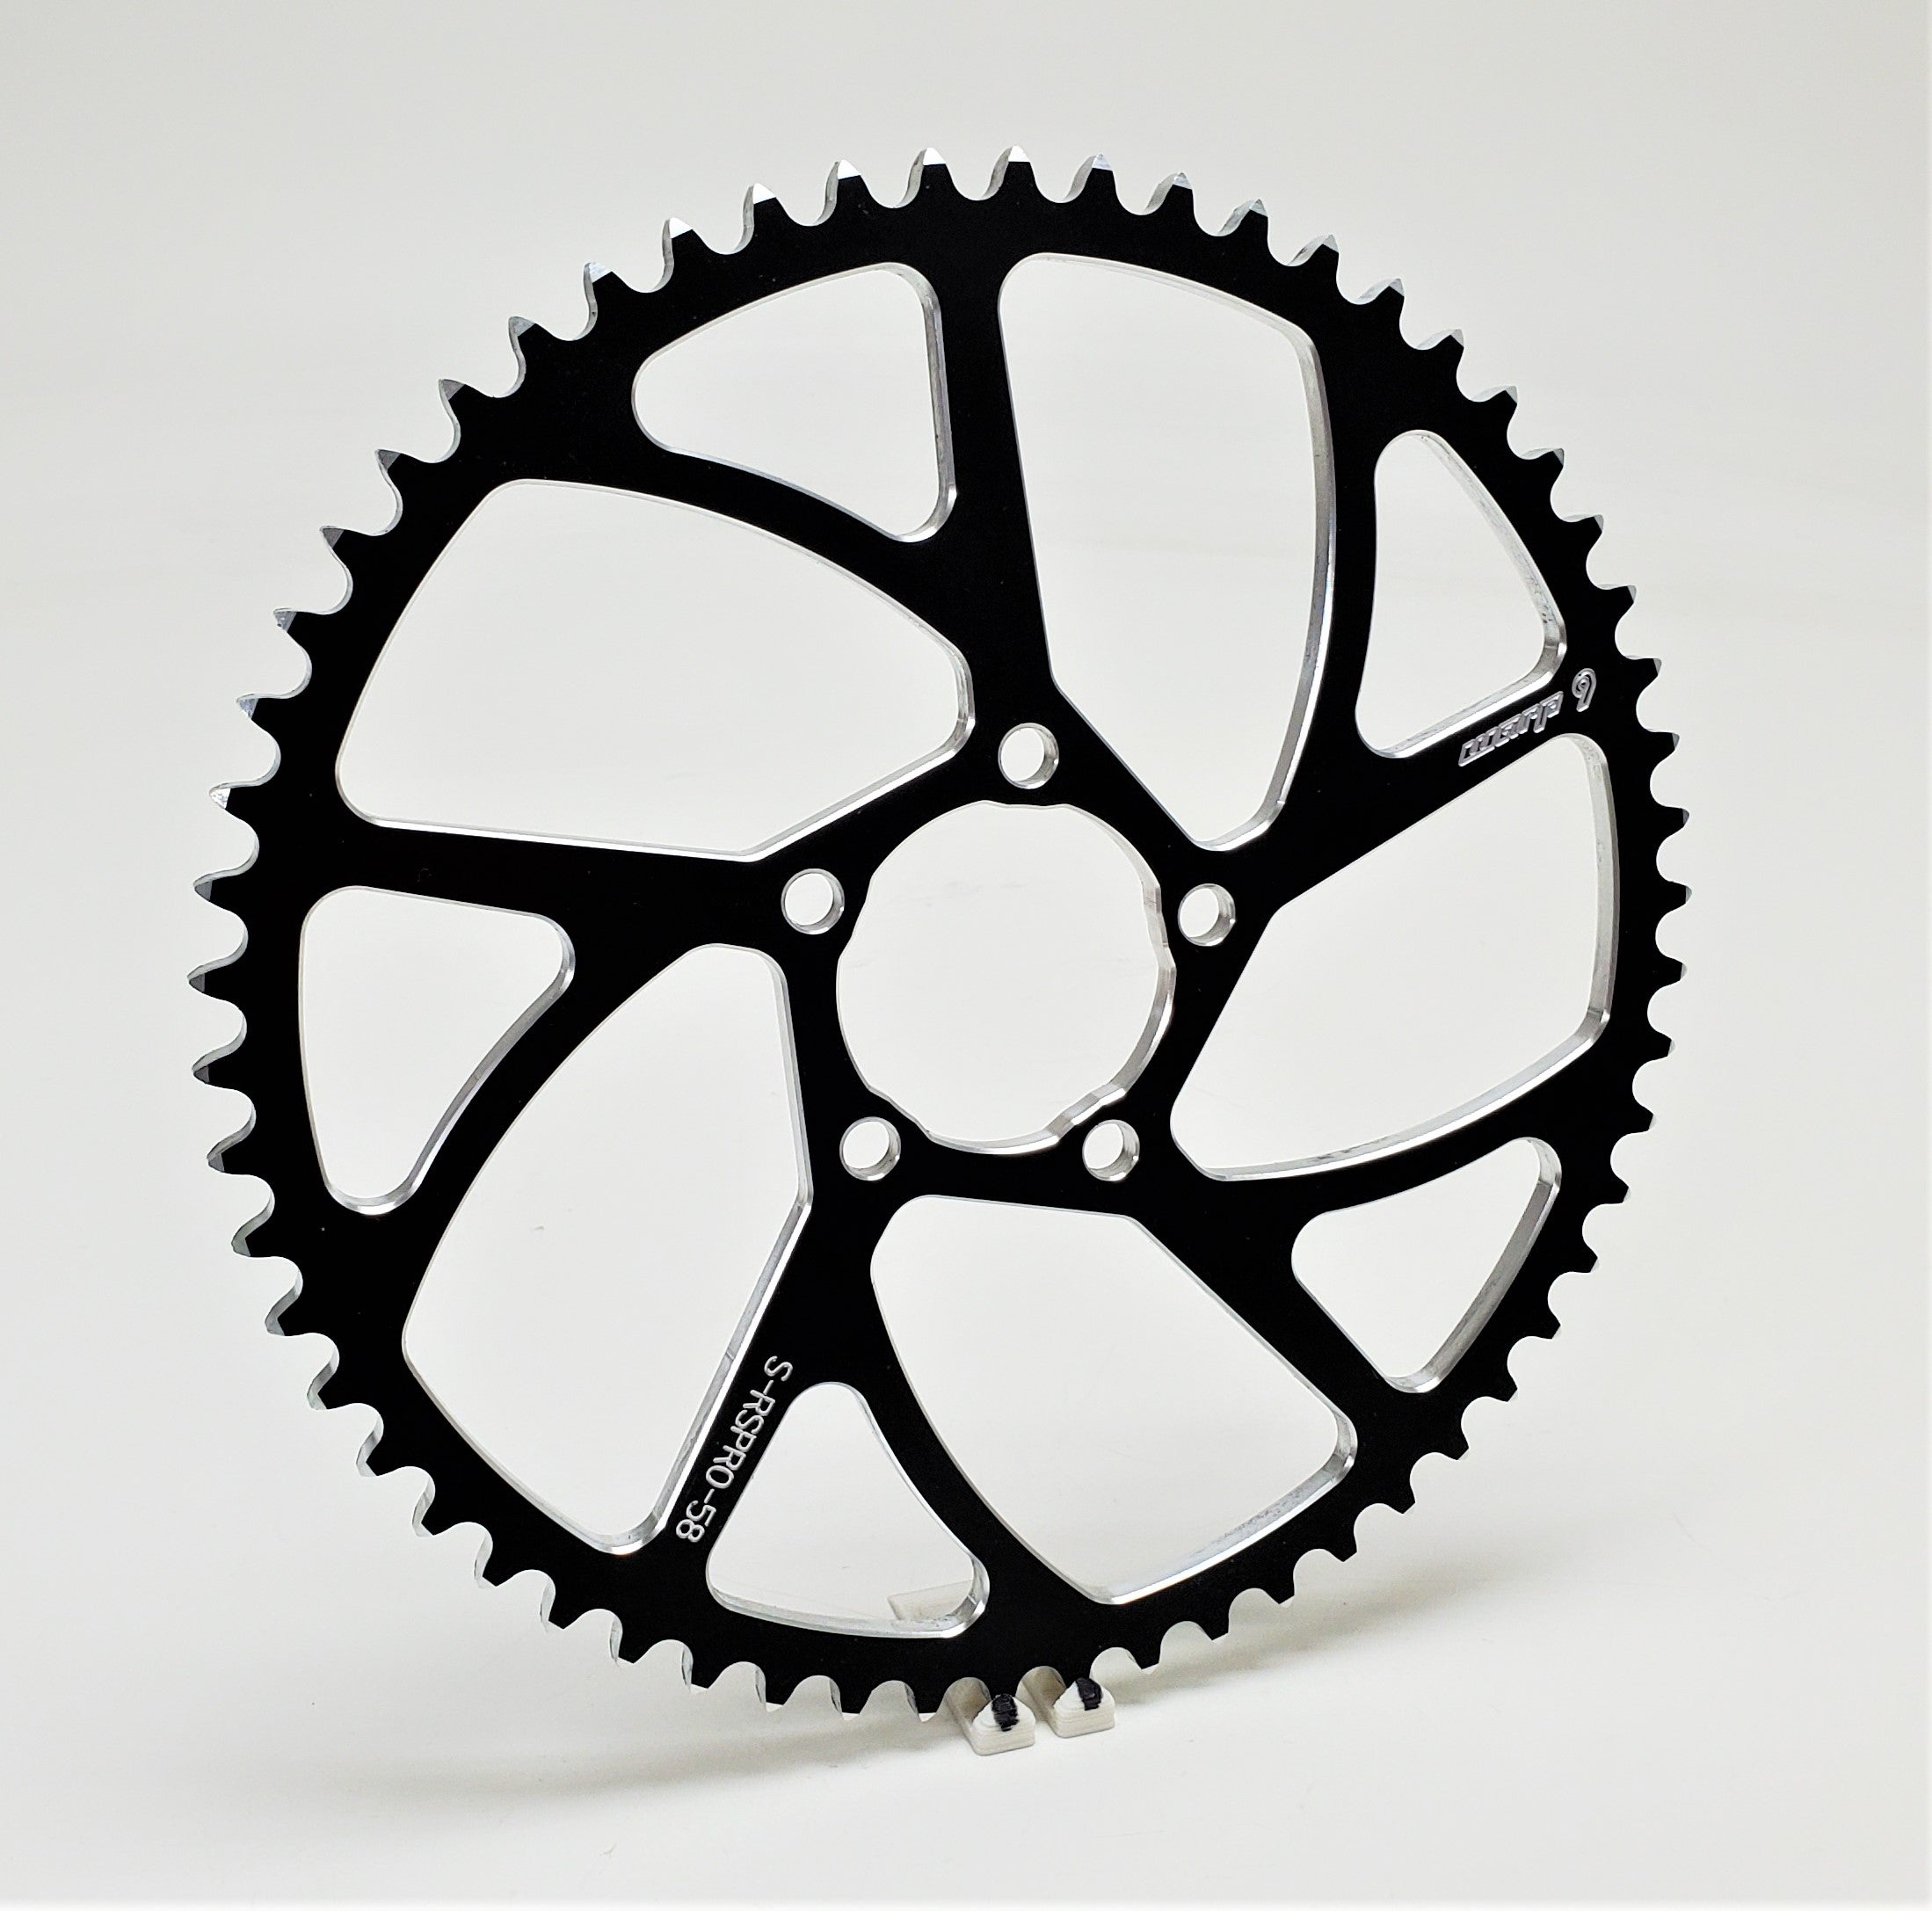 Warp 9 58 tooth sprocket for Surron Lightbee X and Talaria Sting